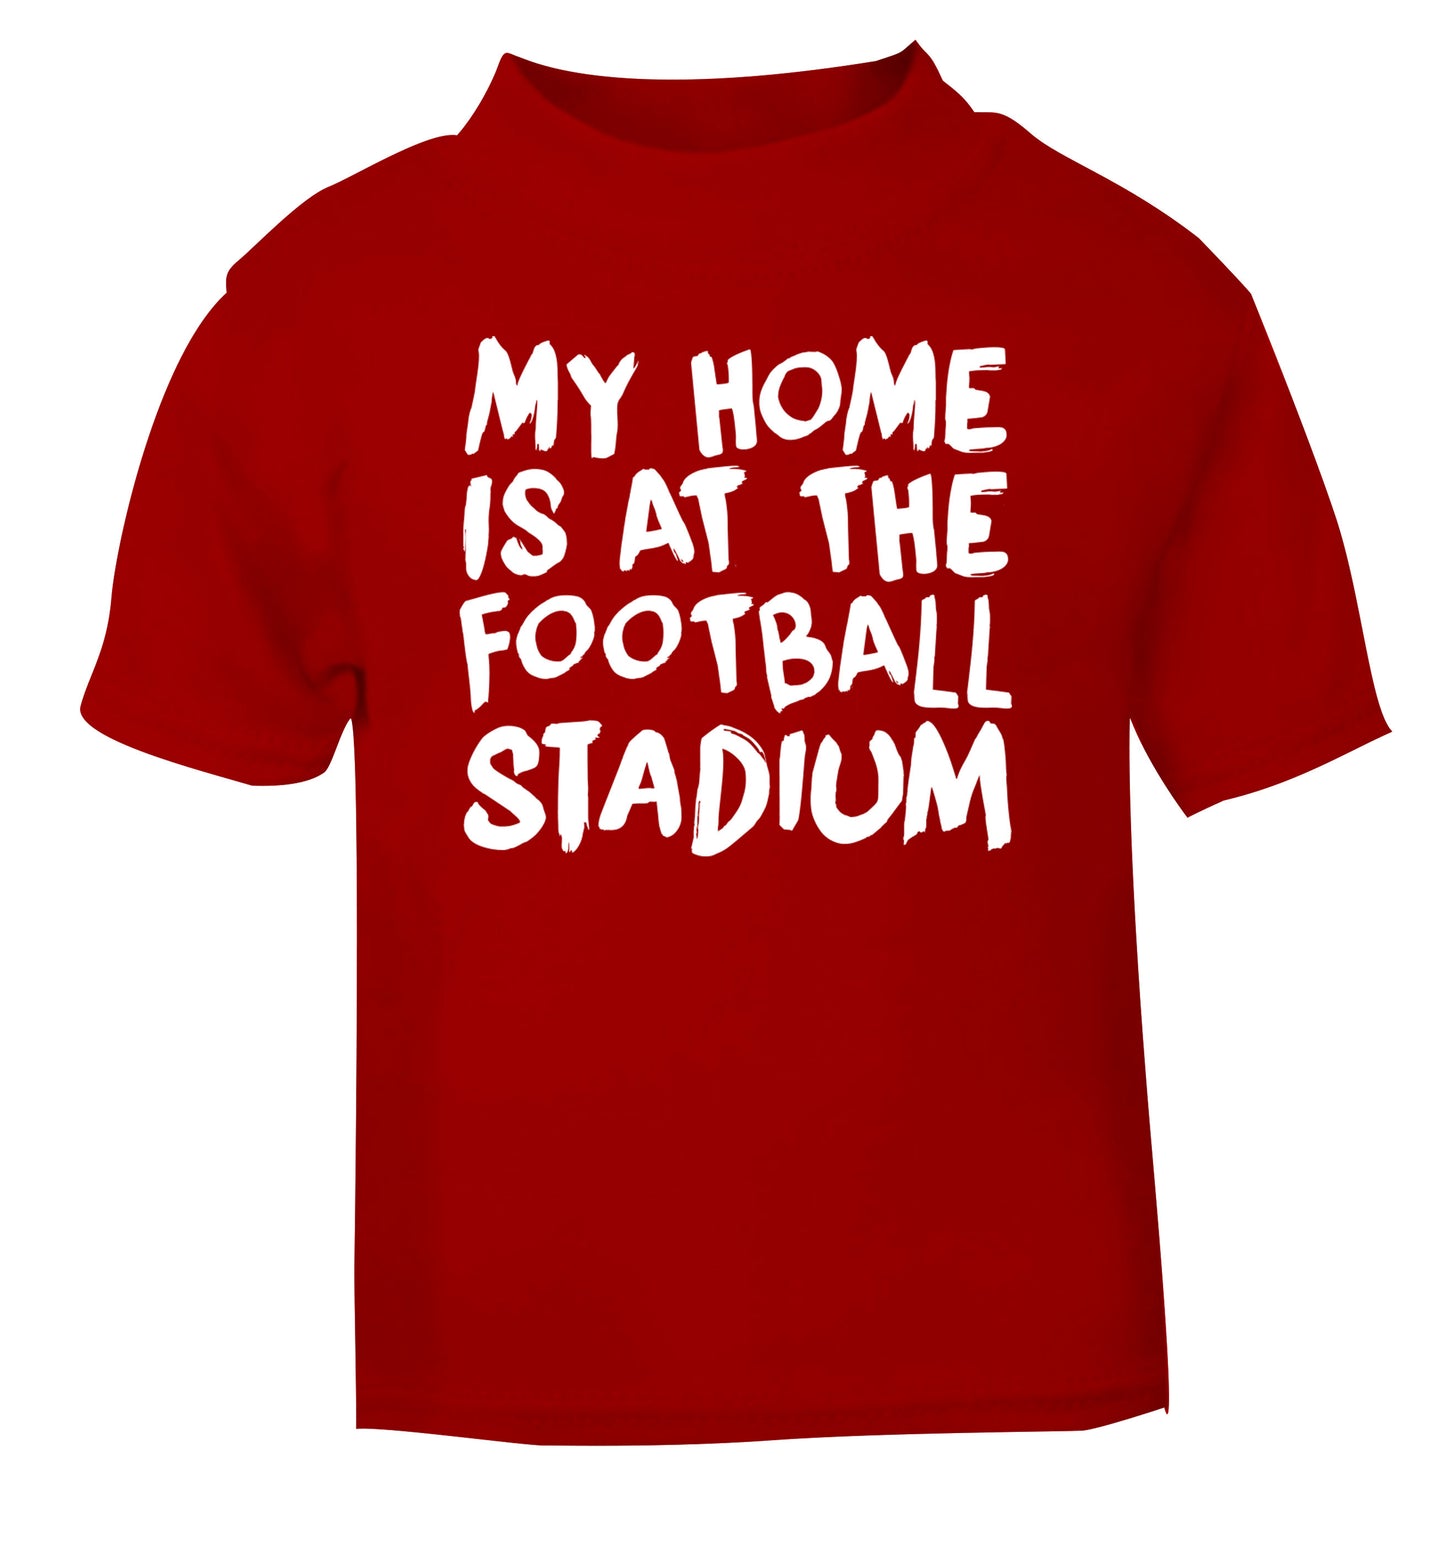 My home is at the football stadium red Baby Toddler Tshirt 2 Years